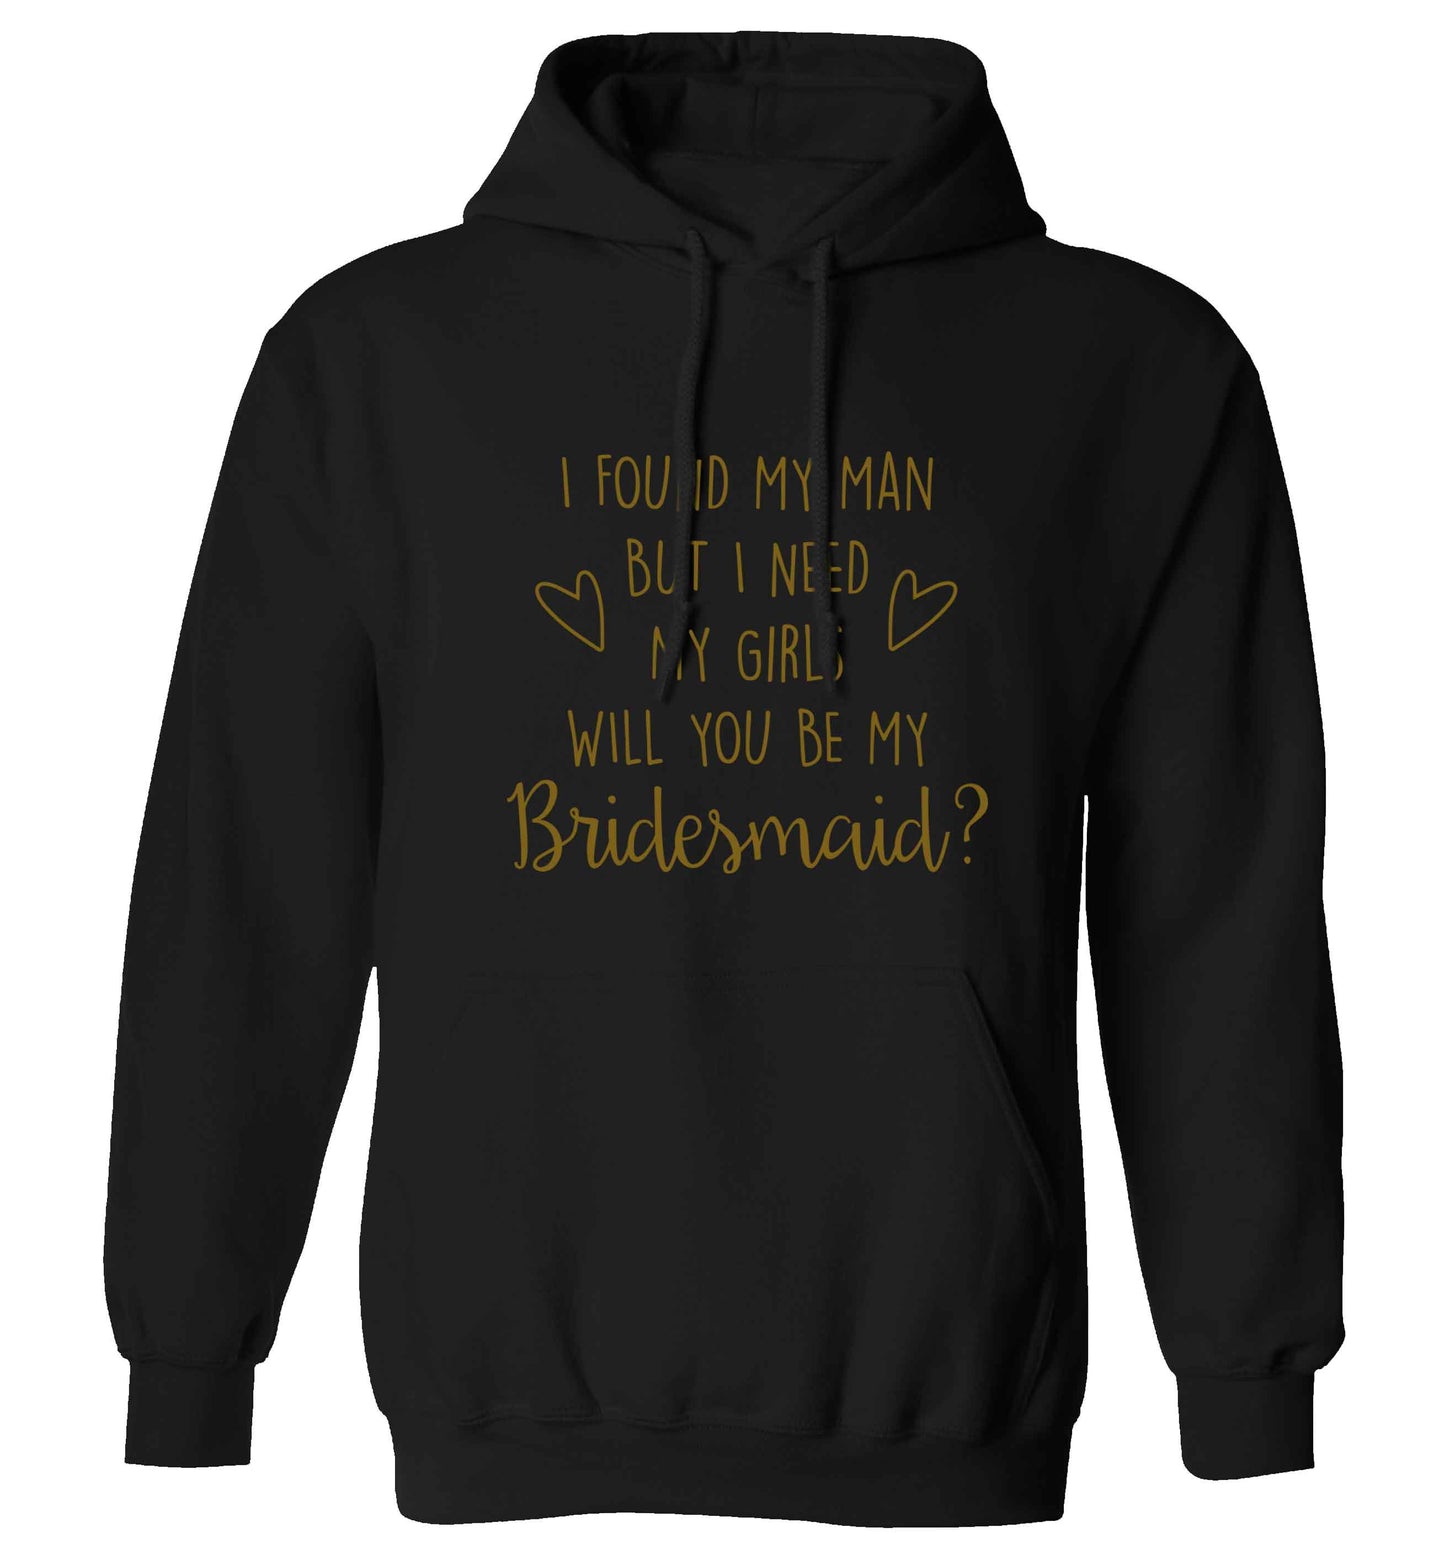 I found my man but I need my girls will you be my bridesmaid? adults unisex black hoodie 2XL